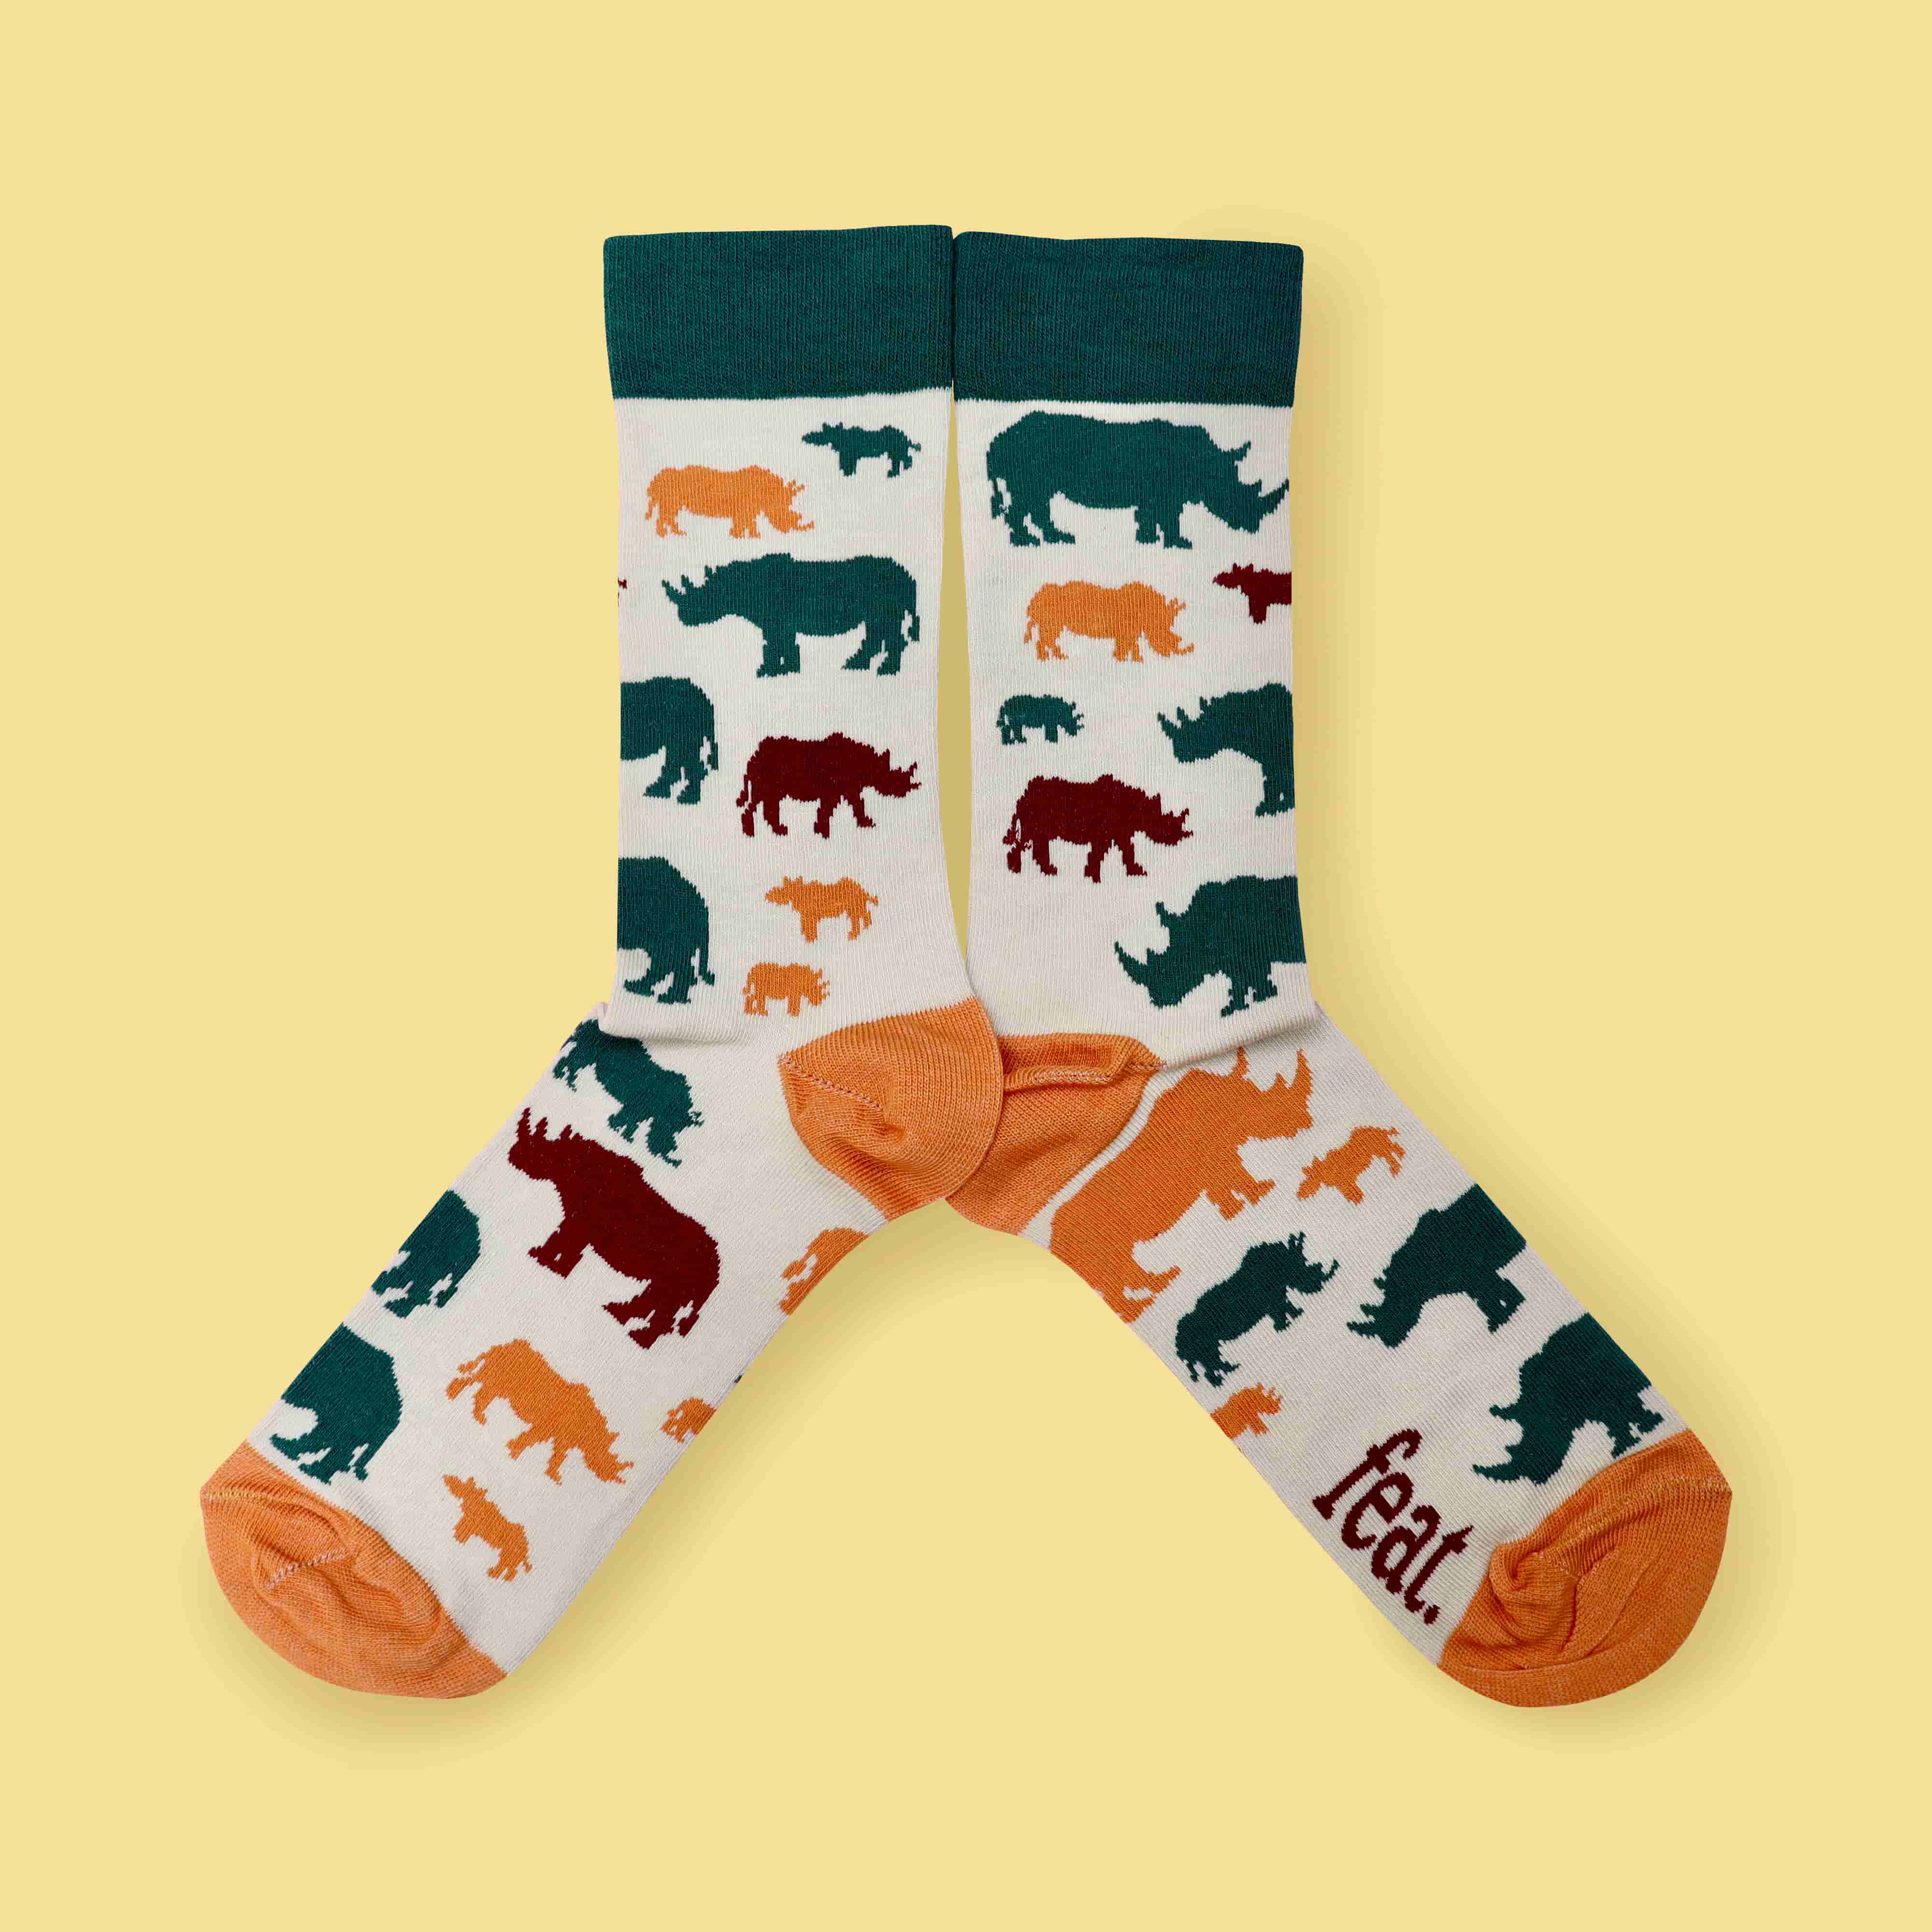 Milk and forest rhino socks yellow background centered